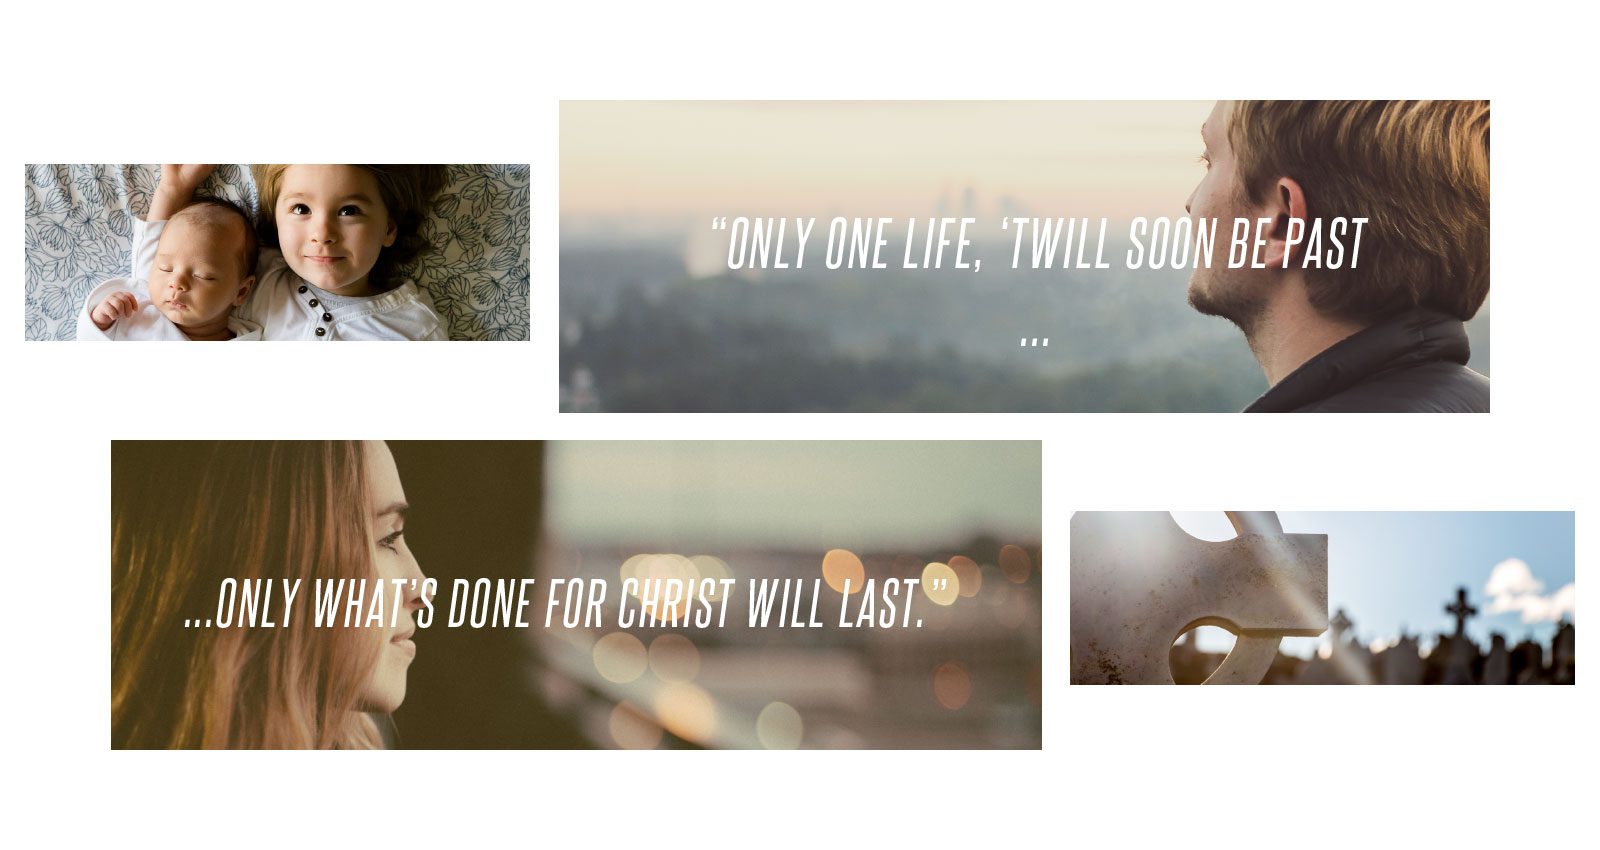 Only one life, 'twill soon be past... only what's done for Christ will last."